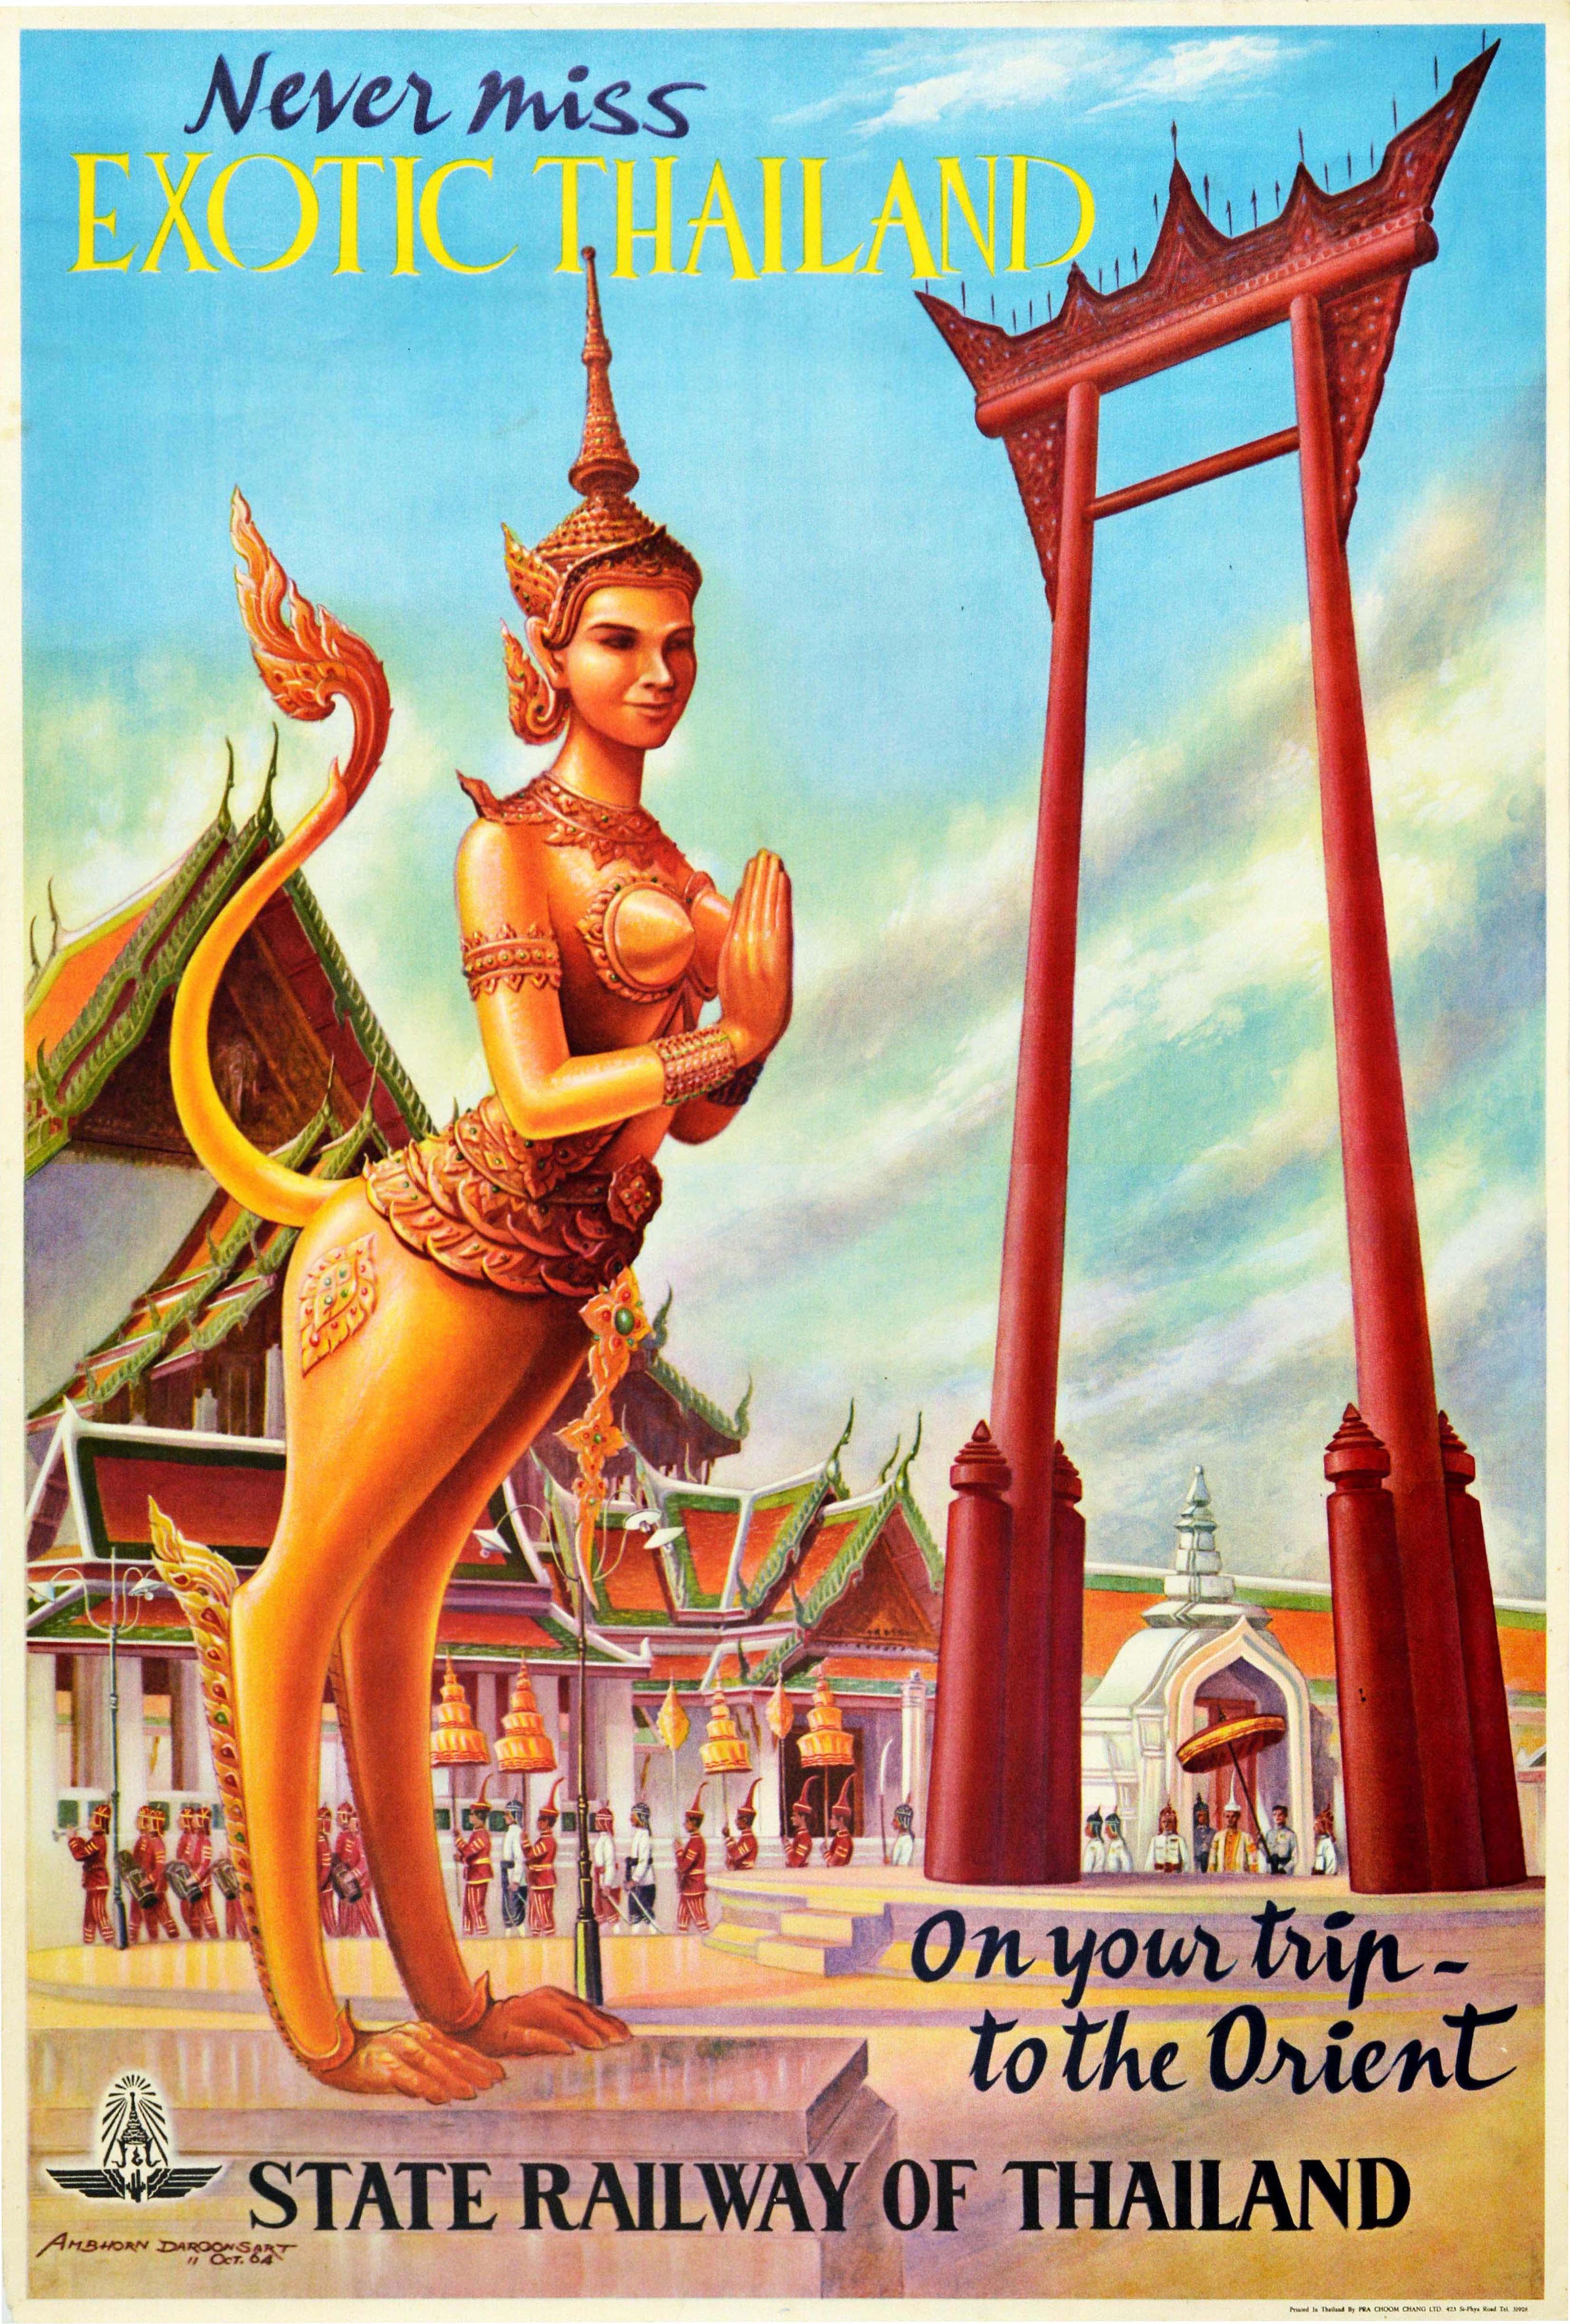 Original vintage travel poster issued by the State Railway of Thailand - Never Miss Exotic Thailand On Your Trip to the Orient - featuring a colourful design showing a gold statue in front of a procession of people walking by a traditional style